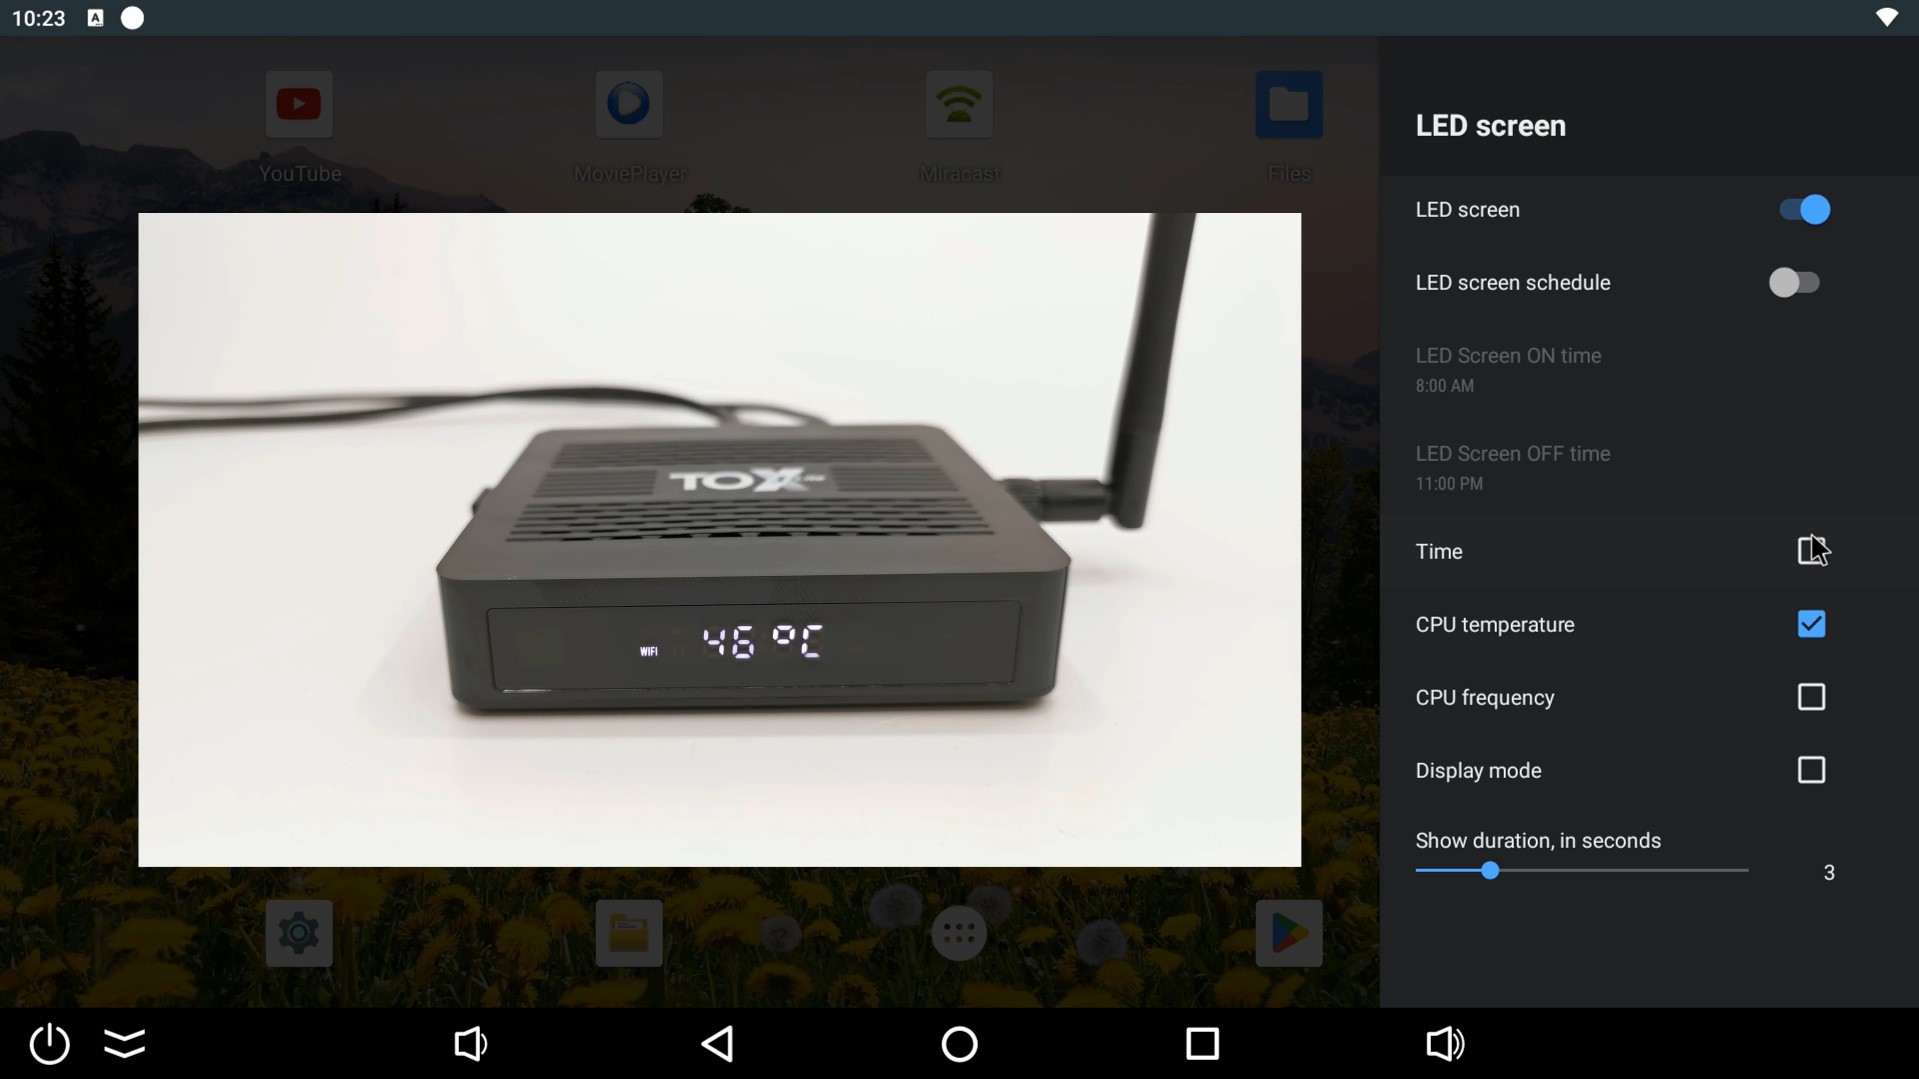 TOX3 TV Box hardware monitor on front LED display